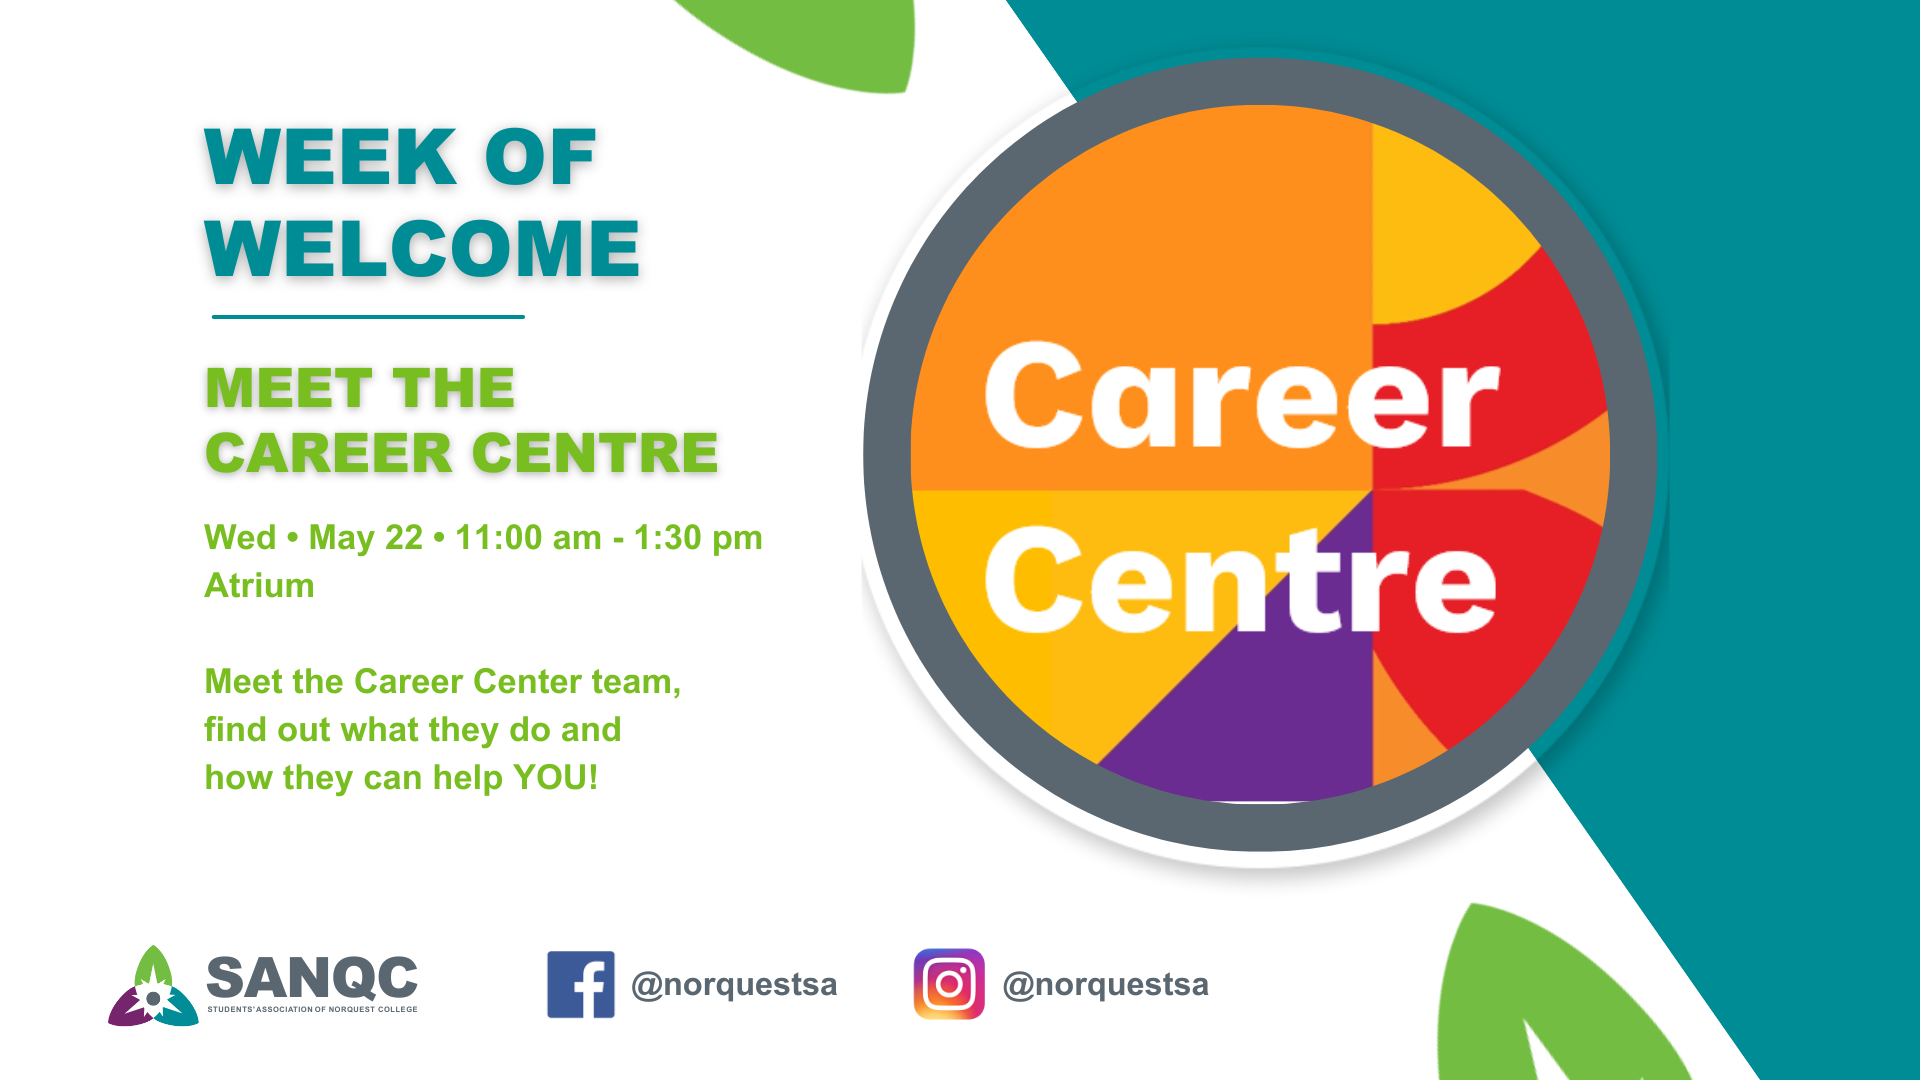 Week of Welcome: Meet the Career Centre